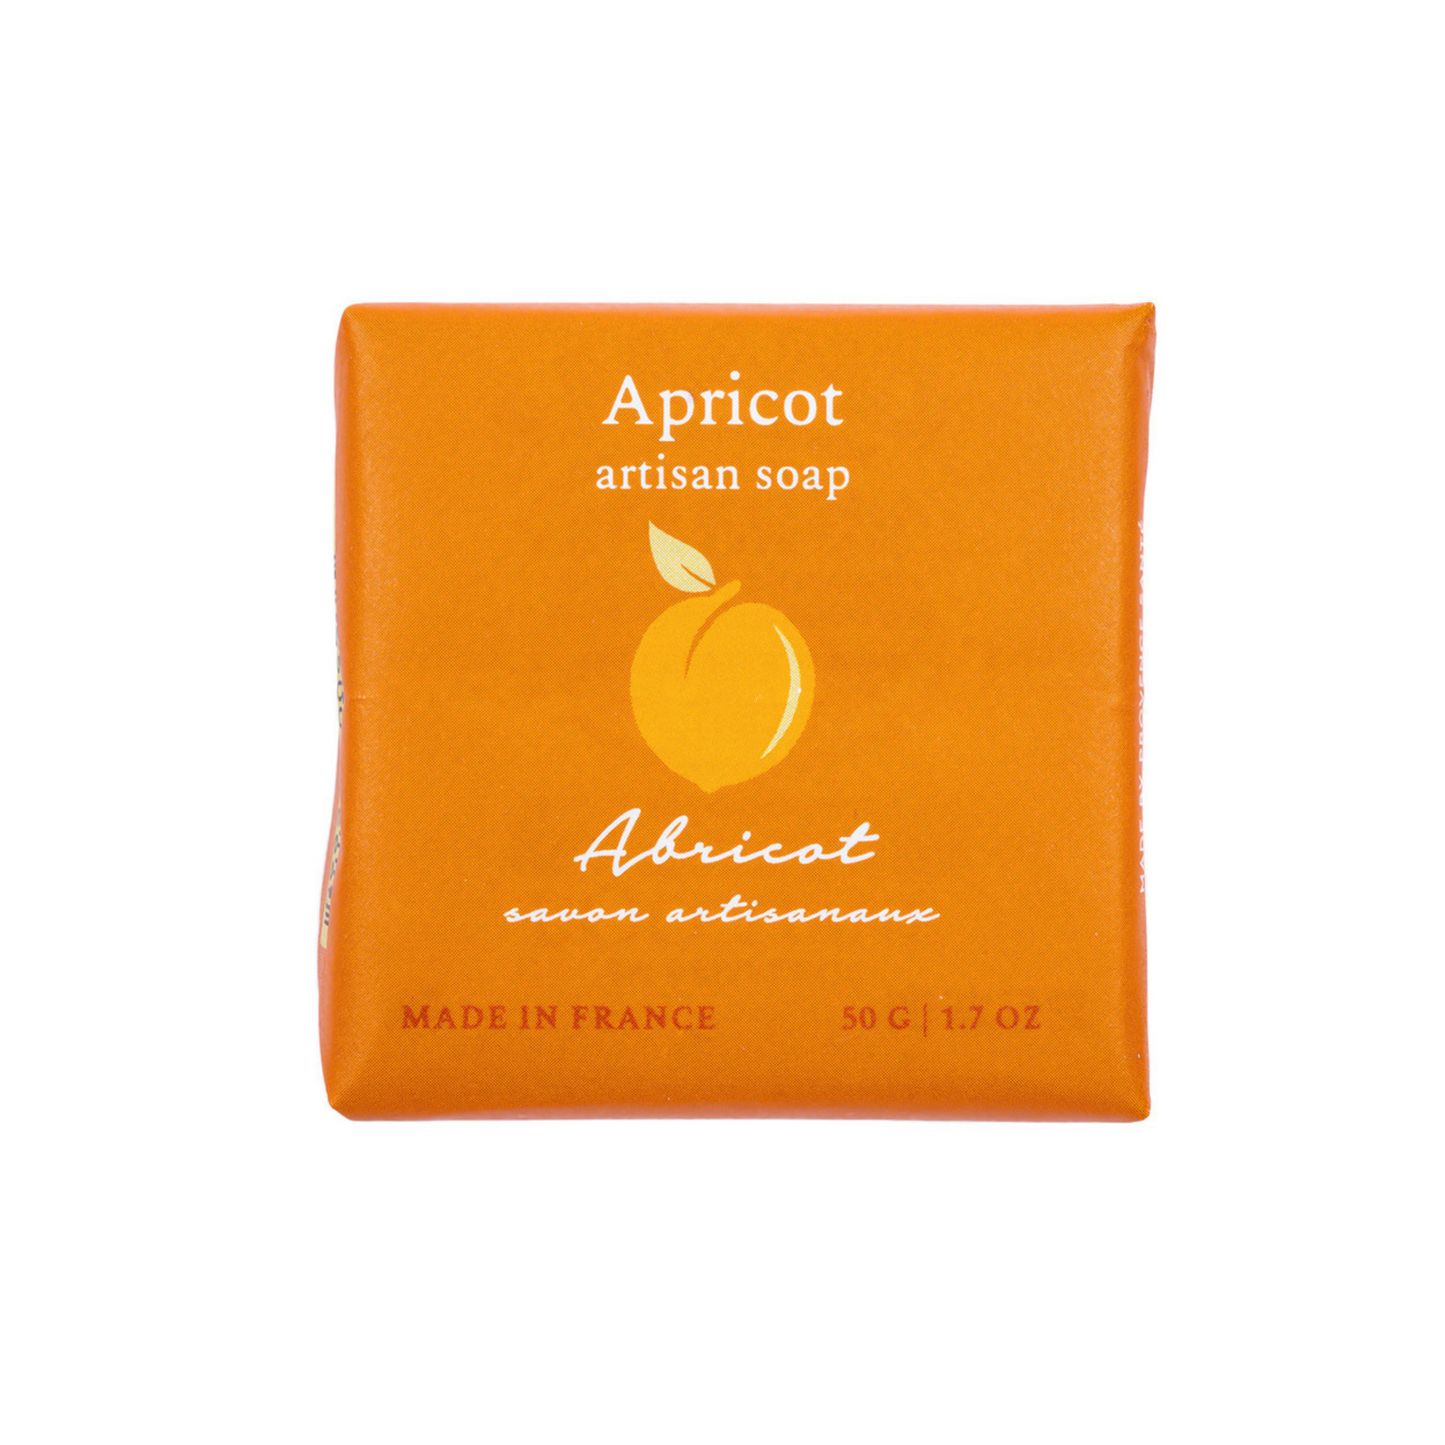 Primary Image of Provence Sante Apricot Guest Soap (1.7 oz)